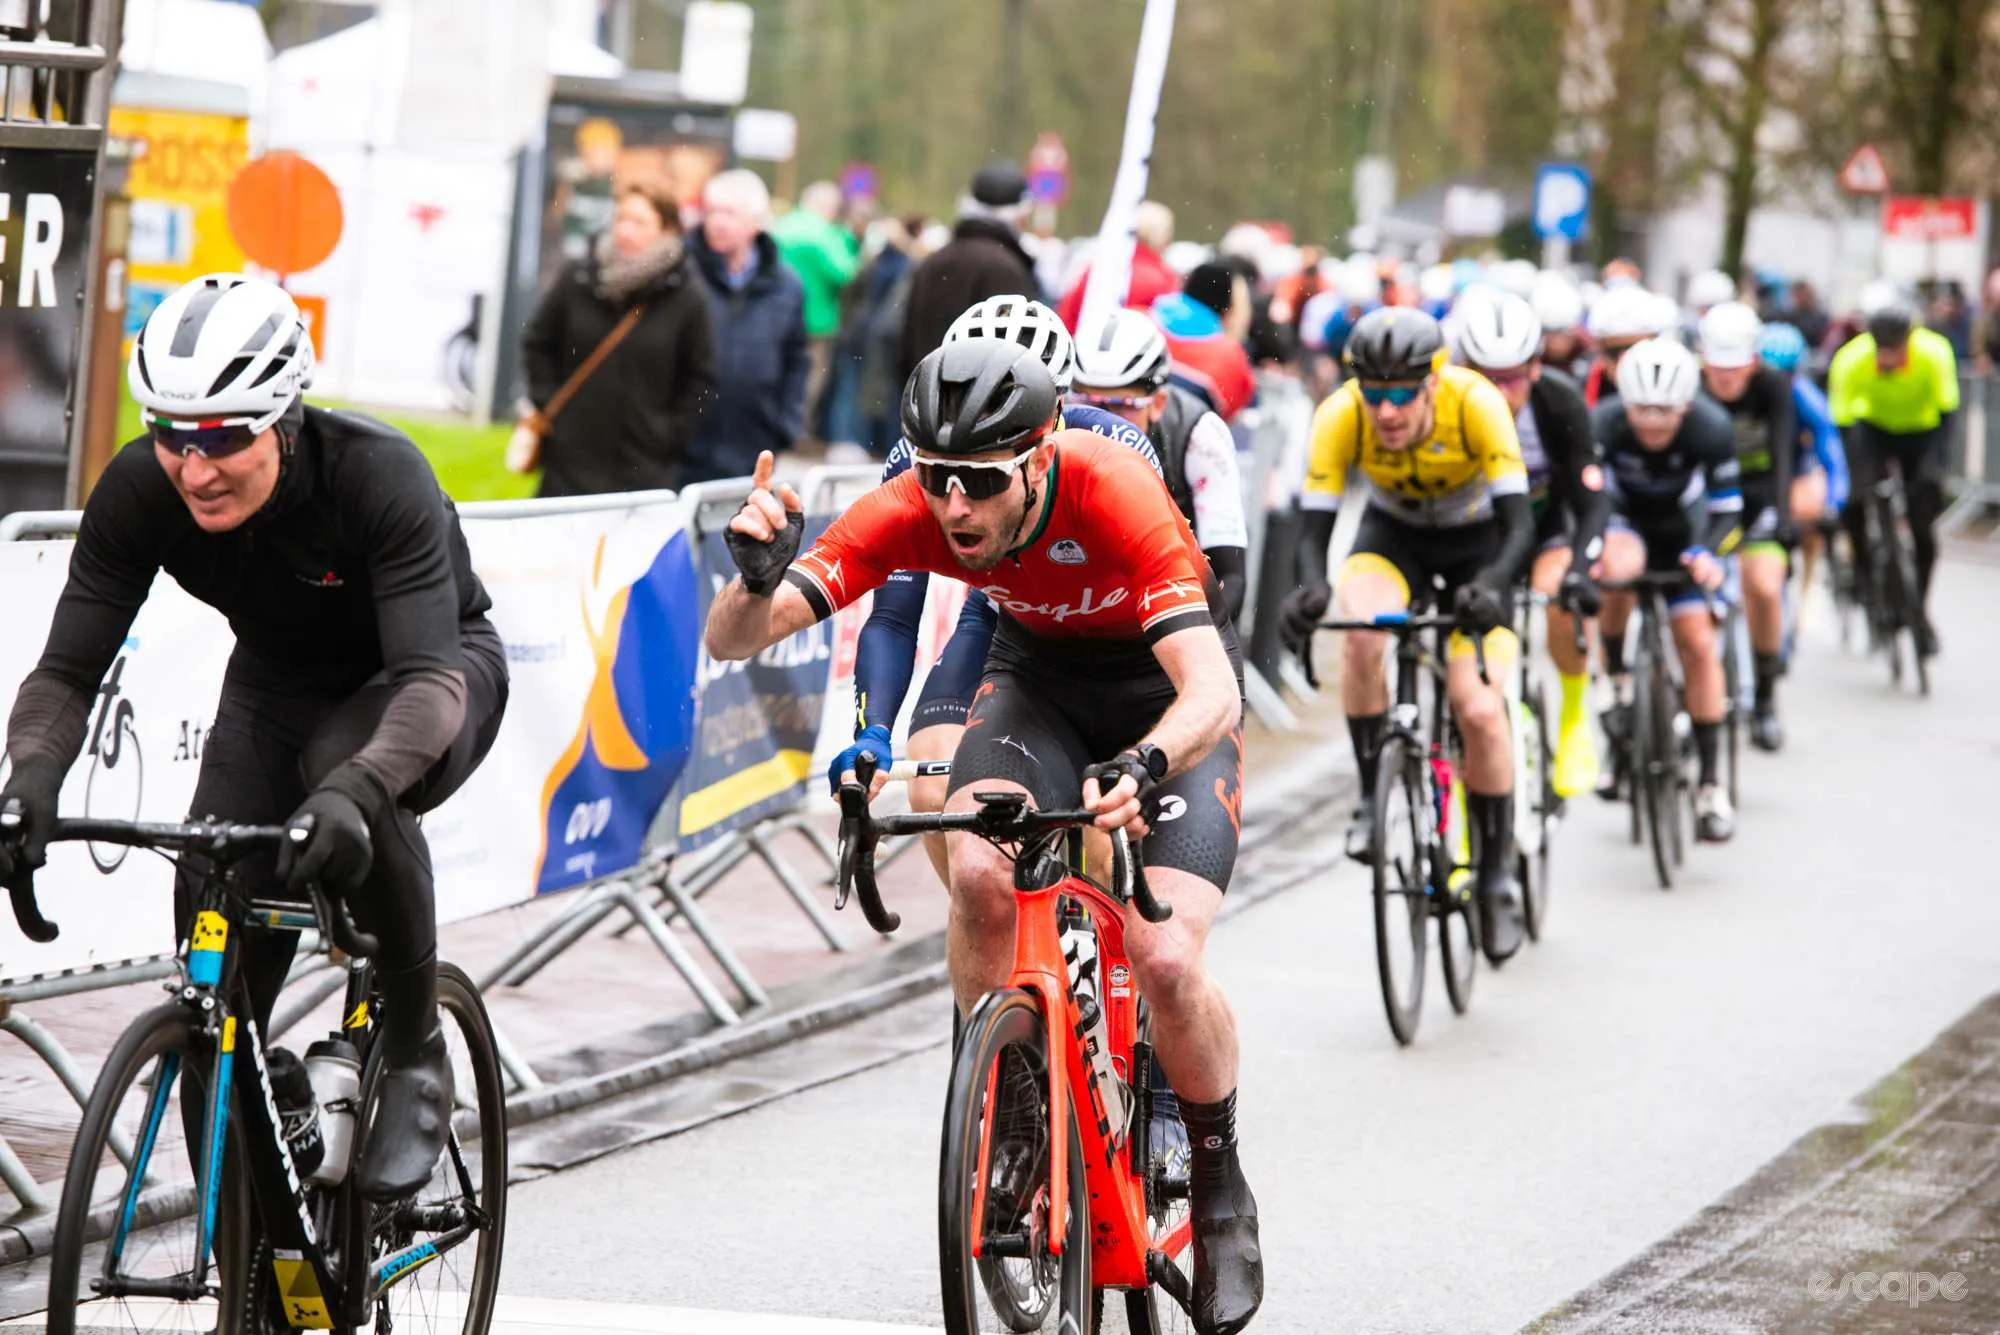 Ronan Mc Laughlin races in a Belgian kermesse. He's chasing a rider in all black, and has a hand raised as if he's about to tell him something.